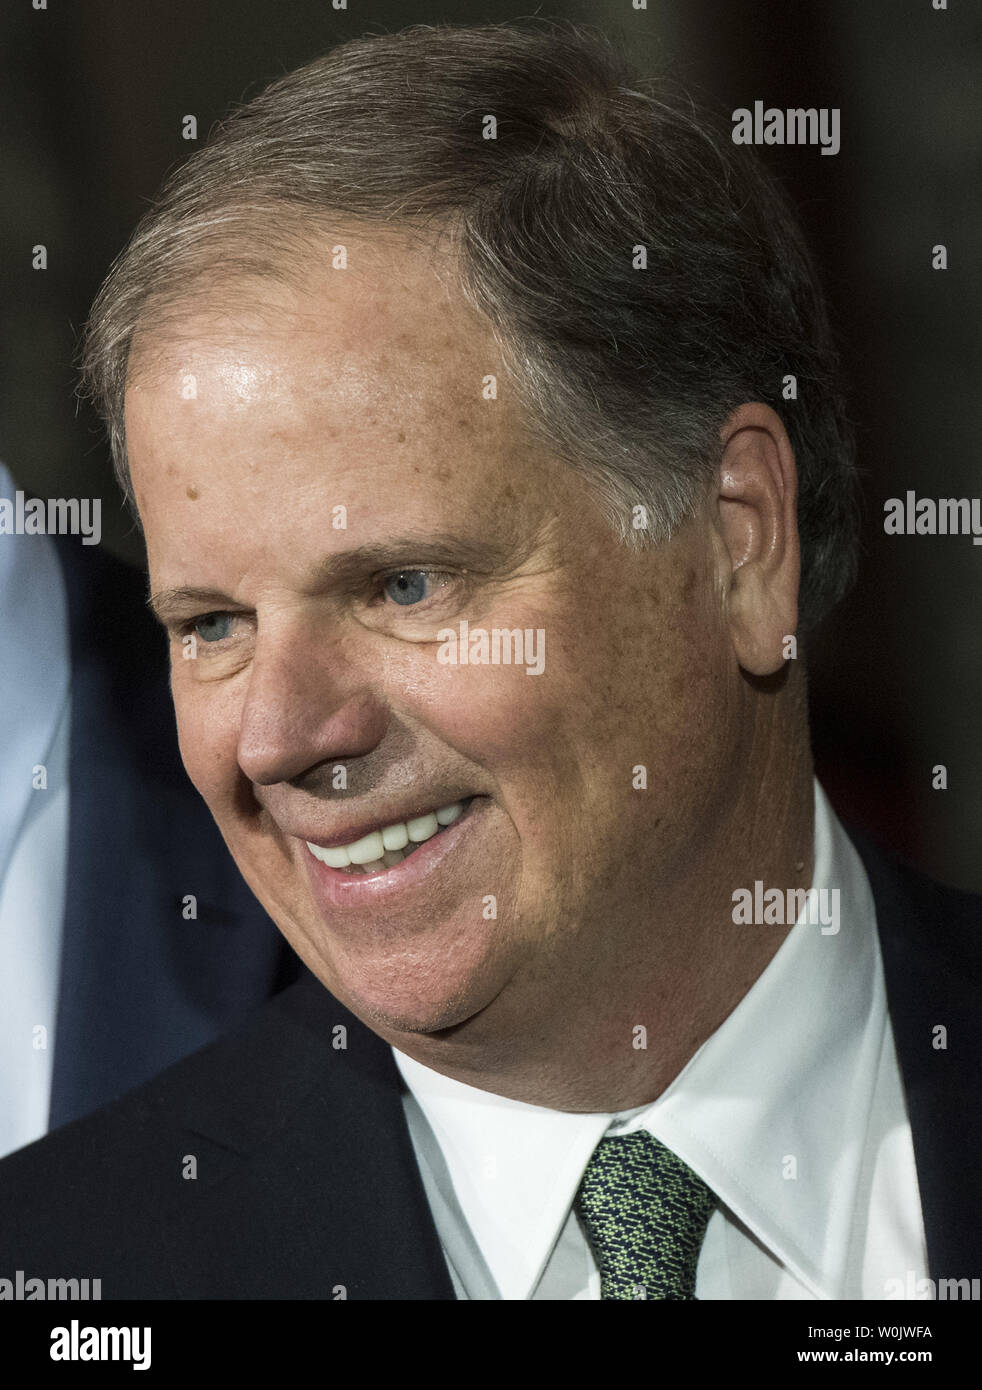 Newly elected Senator Doug Jones, D-AL, smiles after he was sworn in to the U.S. Senate, on Capitol Hill in Washington, D.C. on January 3, 2018. Photo by Kevin Dietsch/UPI Stock Photo